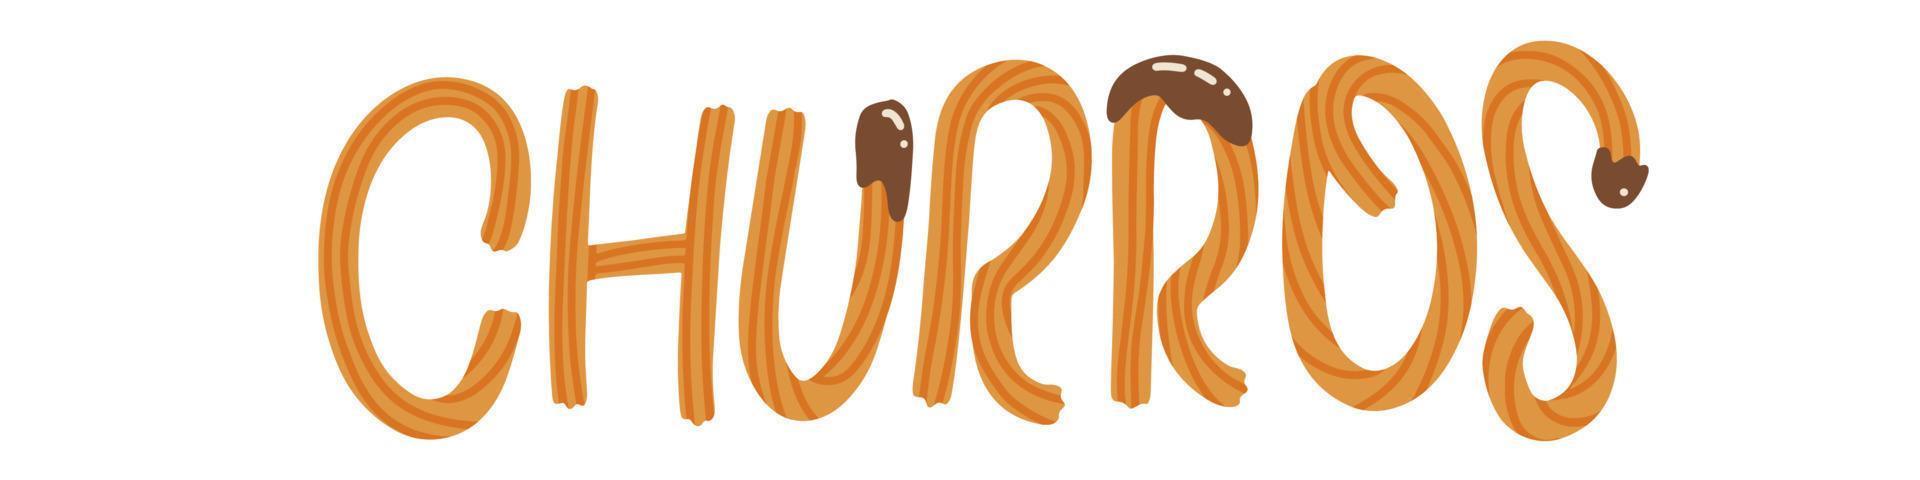 Churros - and drawn lettering word made with churros sticks and chocolate sauce. Vector flat illustration.